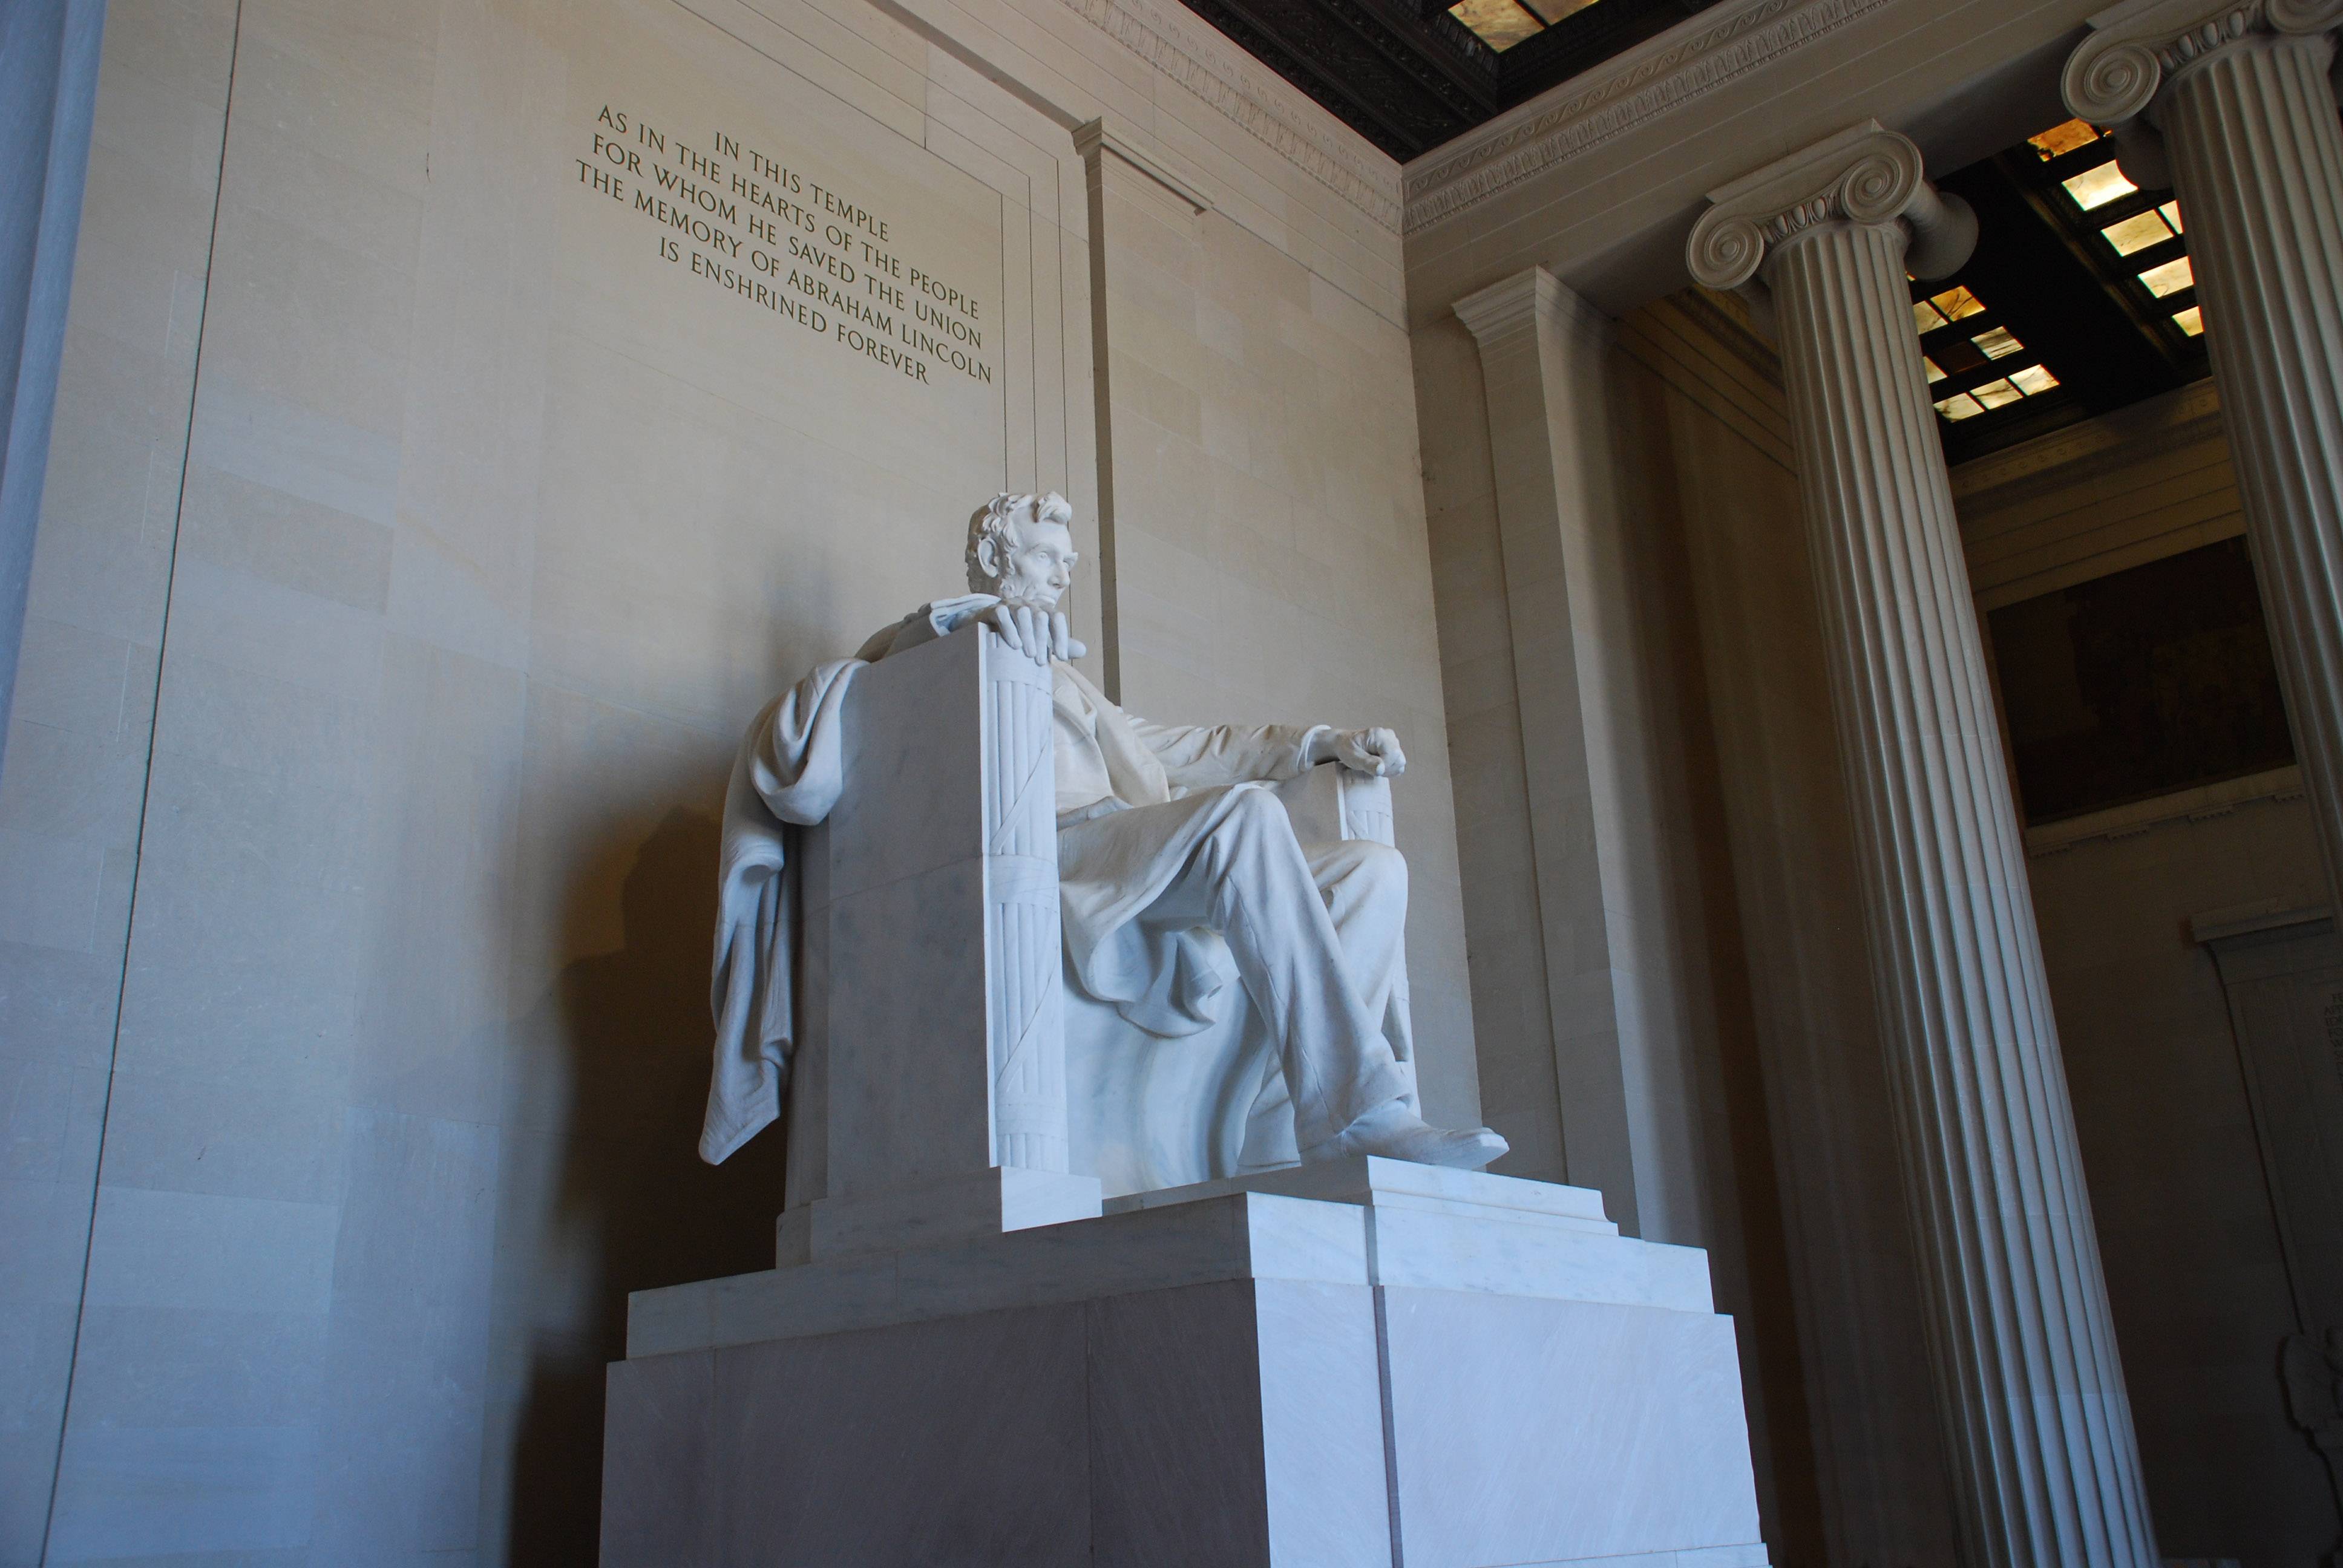 Abraham Lincoln seated in the Memorial, Travel Wallpaper